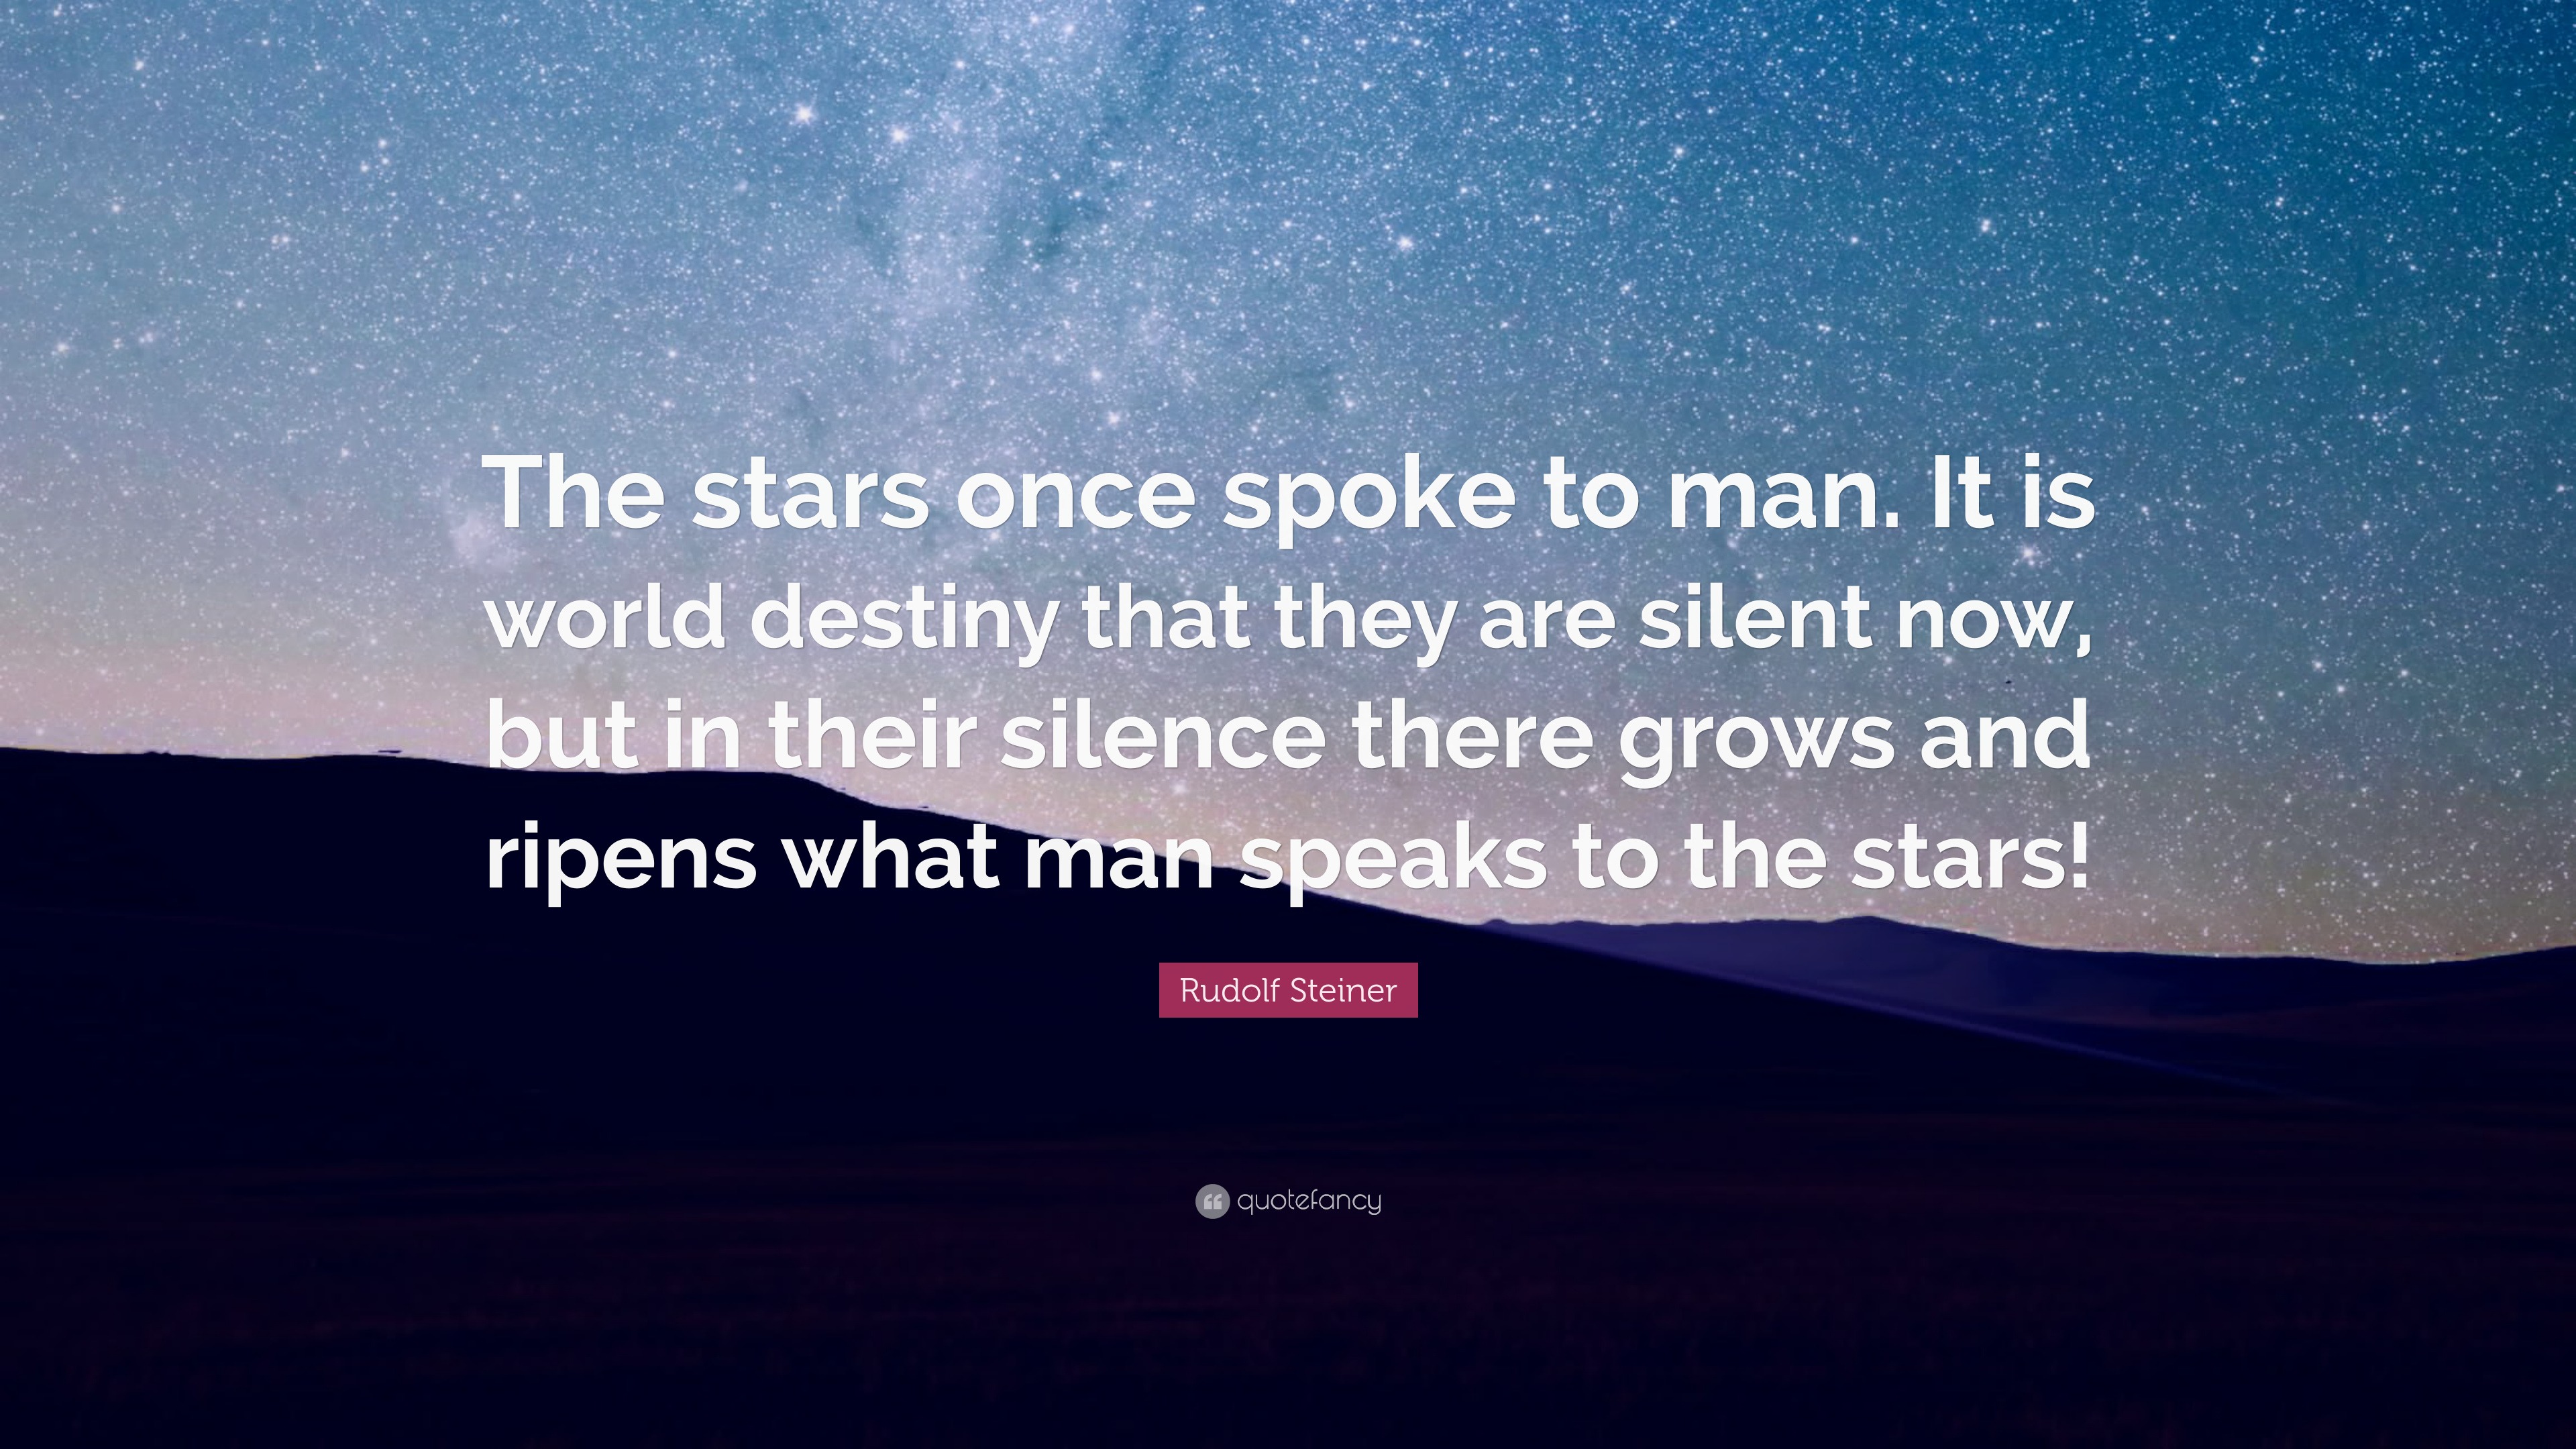 Rudolf Steiner Quote: “The stars once spoke to man. It is world destiny